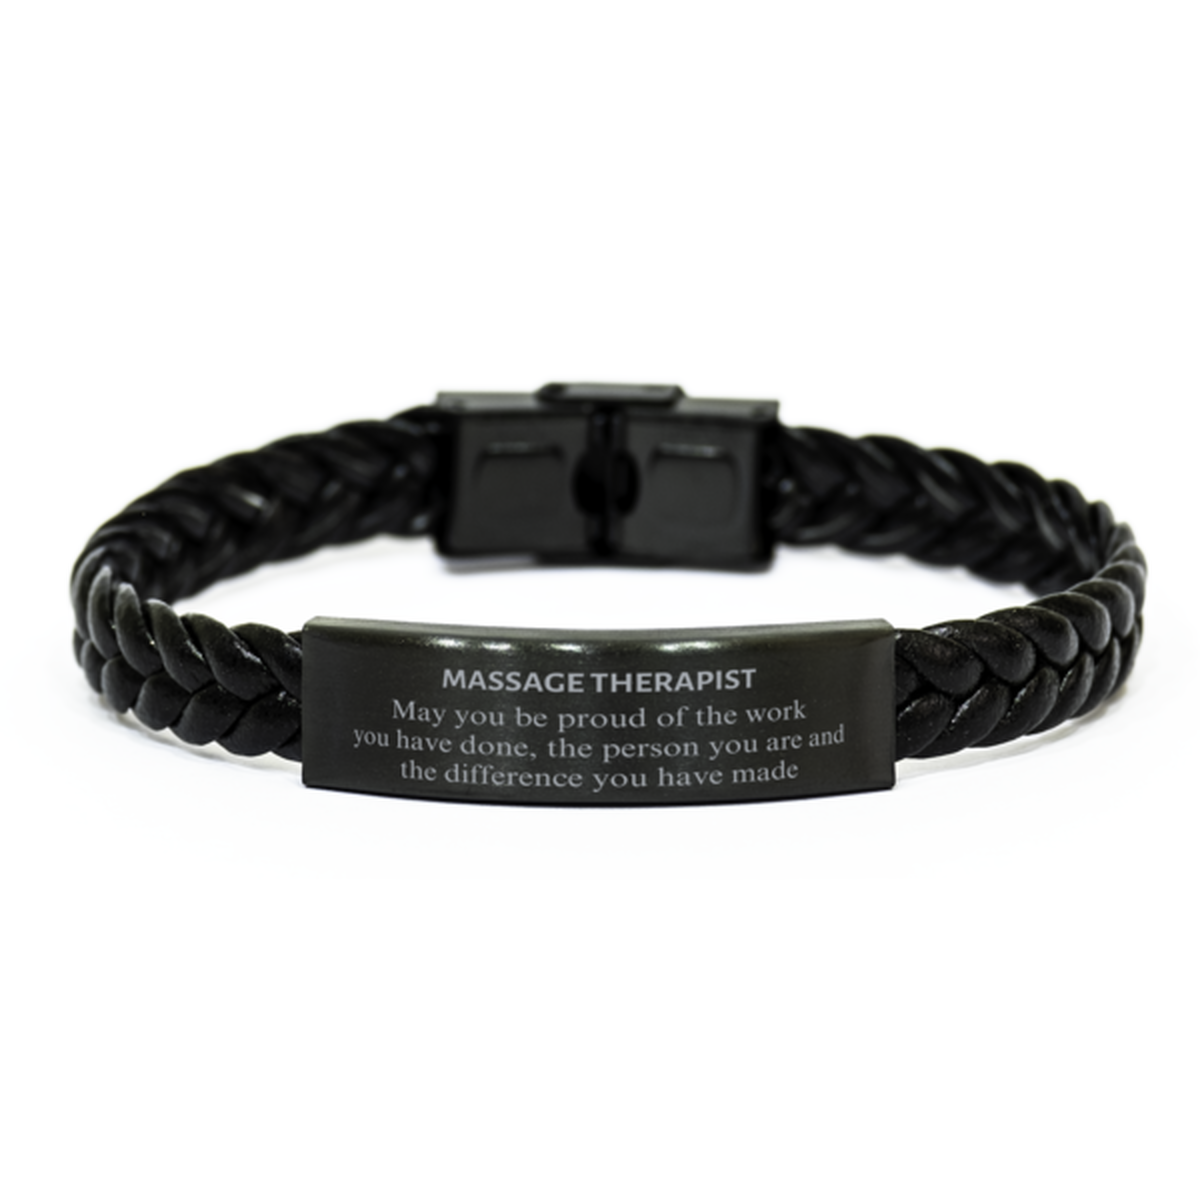 Massage Therapist May you be proud of the work you have done, Retirement Massage Therapist Braided Leather Bracelet for Colleague Appreciation Gifts Amazing for Massage Therapist